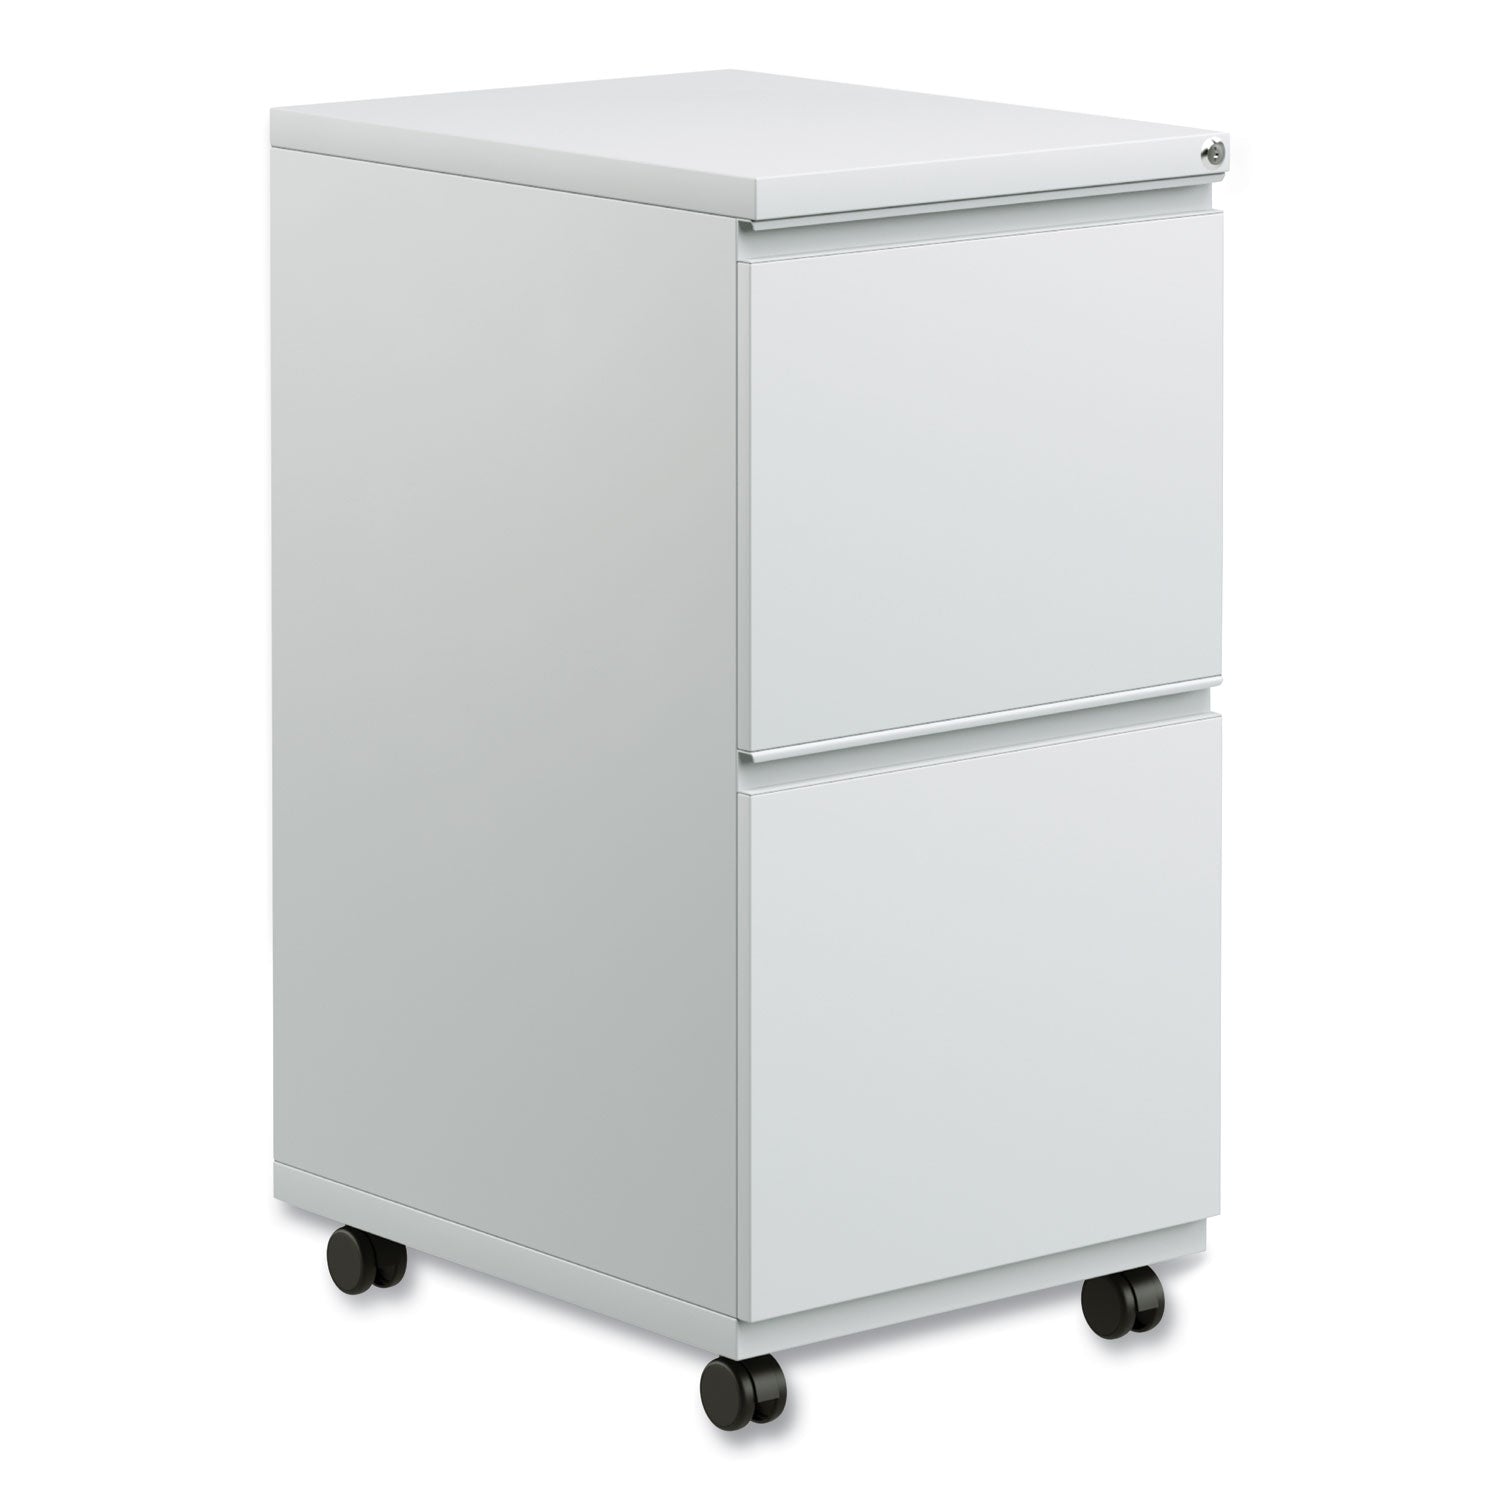 file-pedestal-with-full-length-pull-left-or-right-2-legal-letter-size-file-drawers-light-gray-1496-x-1929-x-2775_alepbfflg - 1